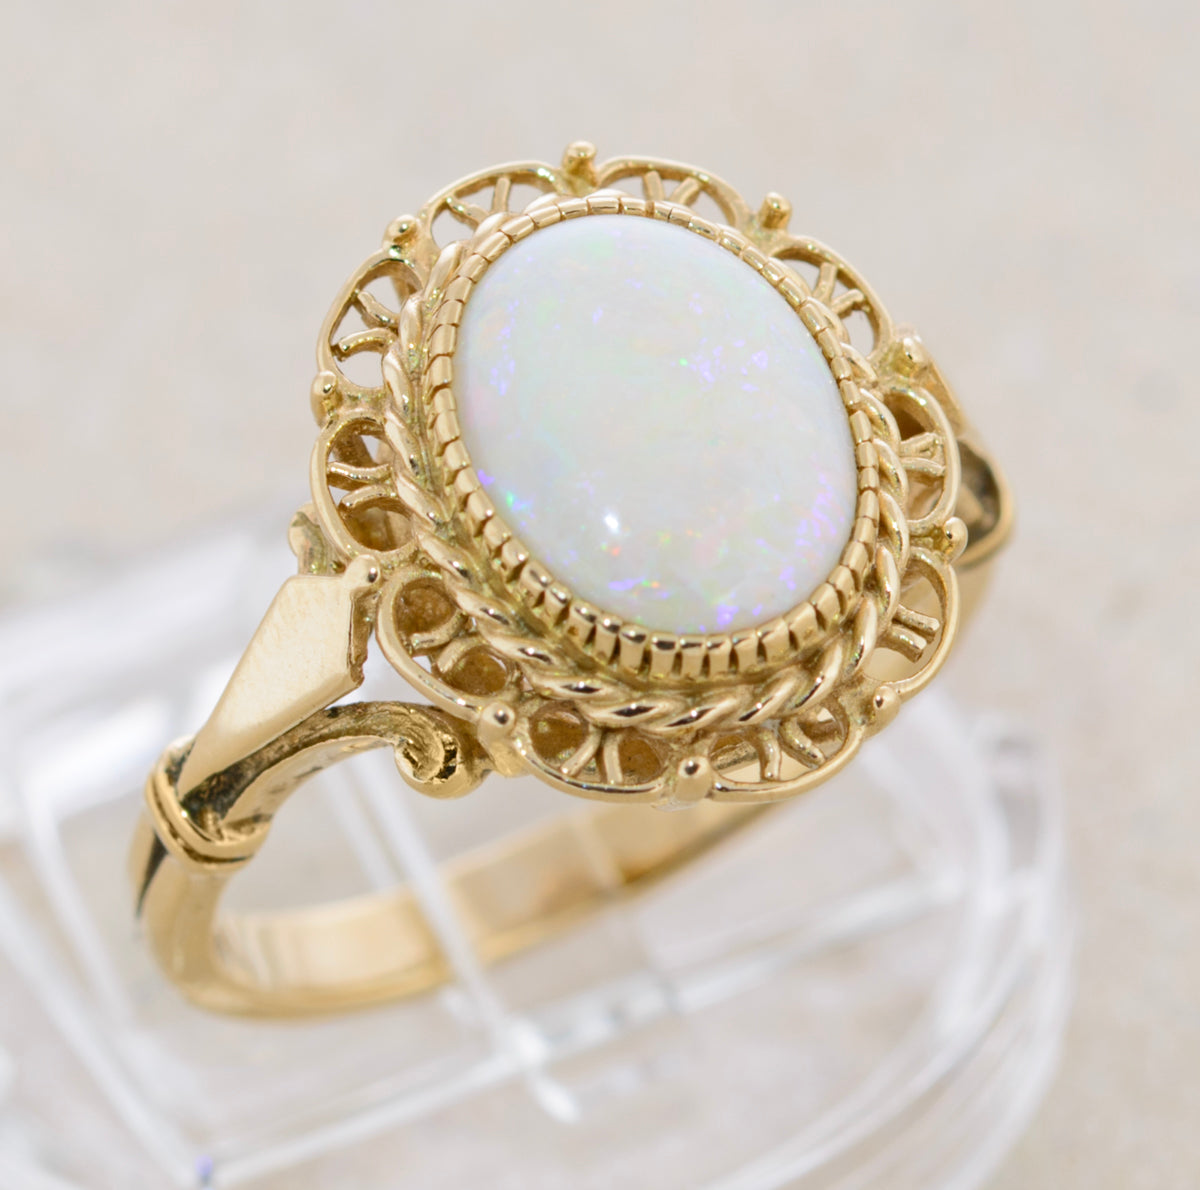 Vintage 9ct Gold Ladies Ring With Opal Cabochon & Decorative Mount c.1980's (A1764)